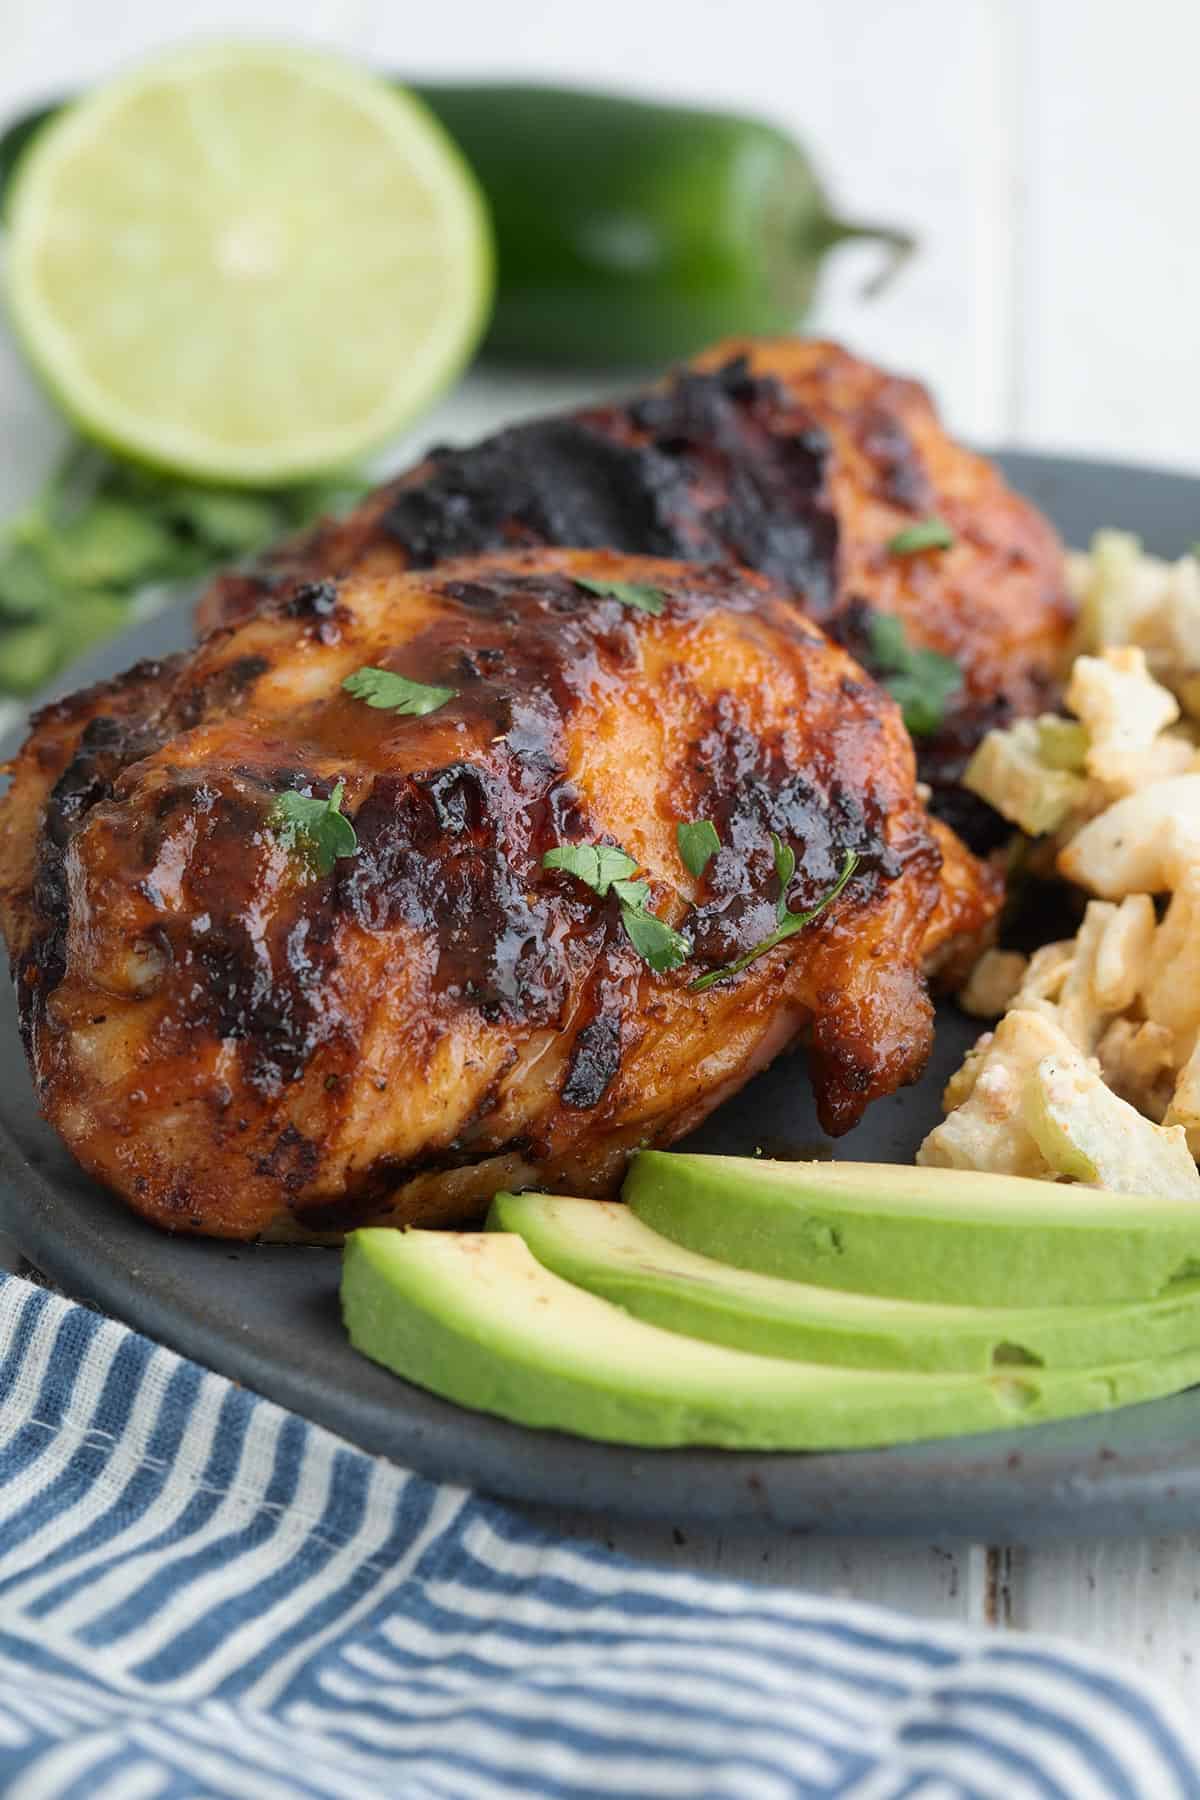 Chipotle Lime Rooster – Candy and Spicy Marinade!